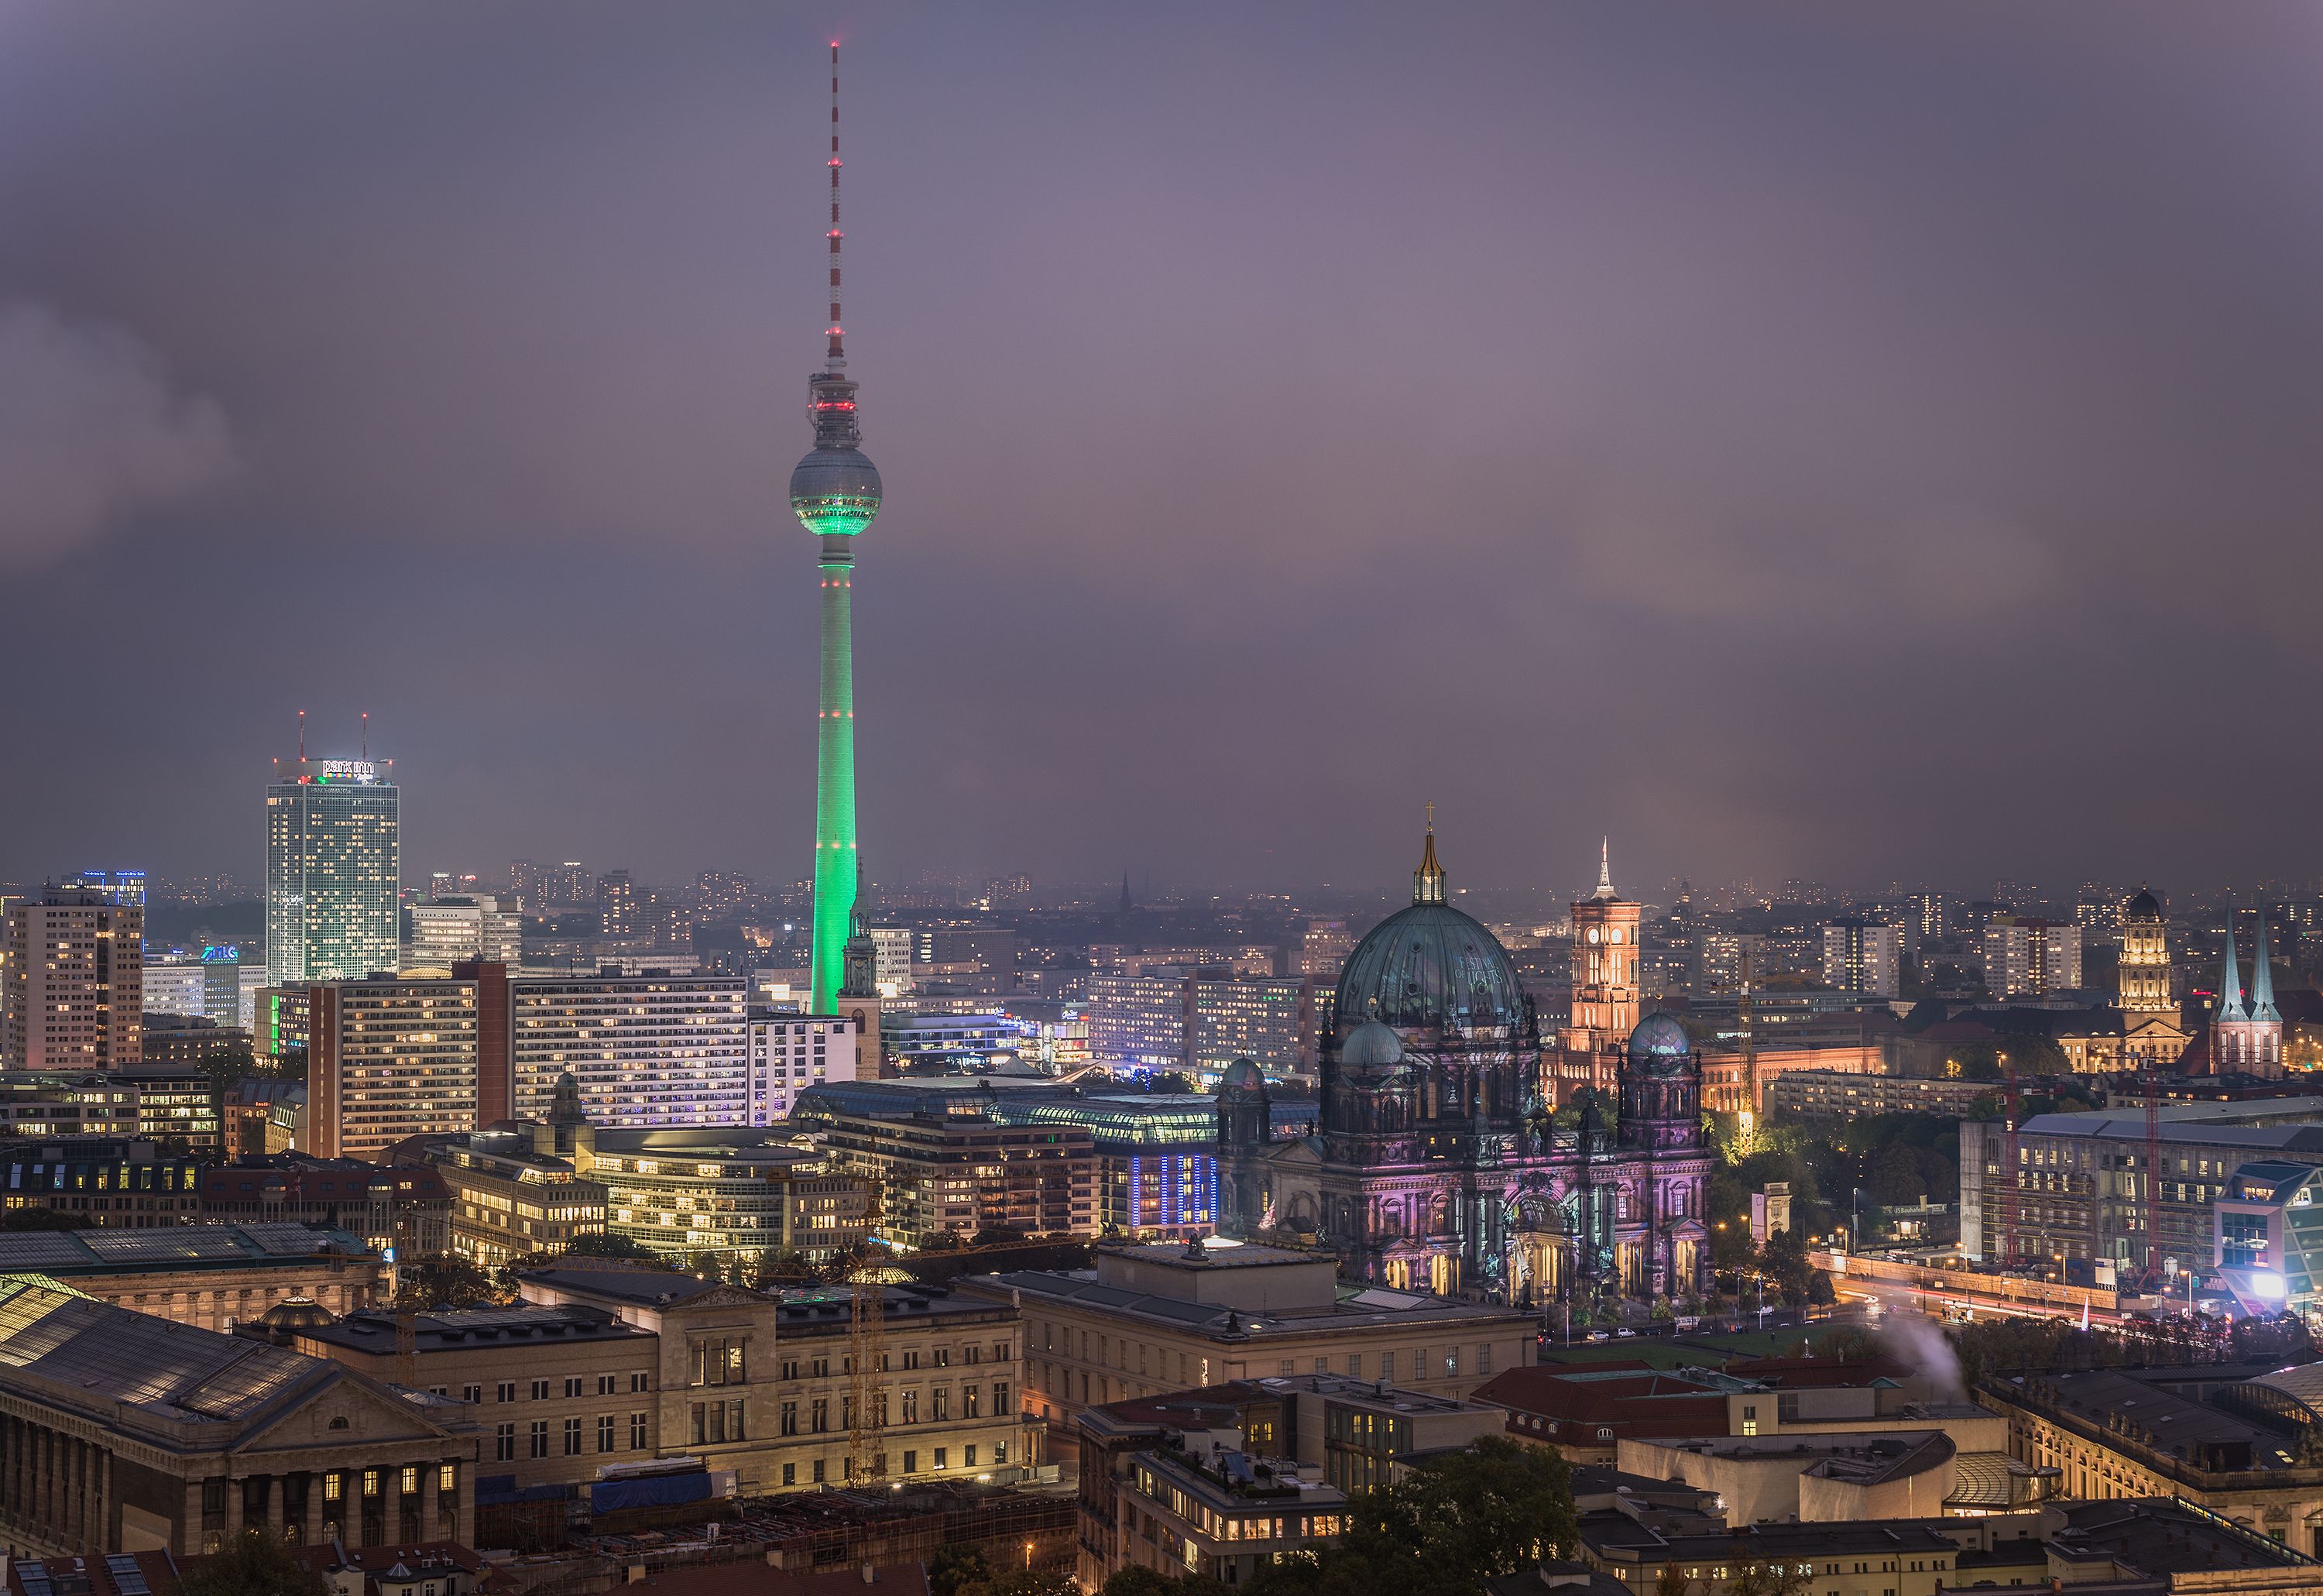 berlin, germany, man made, architecture, cathedral, city, cloud, europe, light, night, sky, skyline, cities